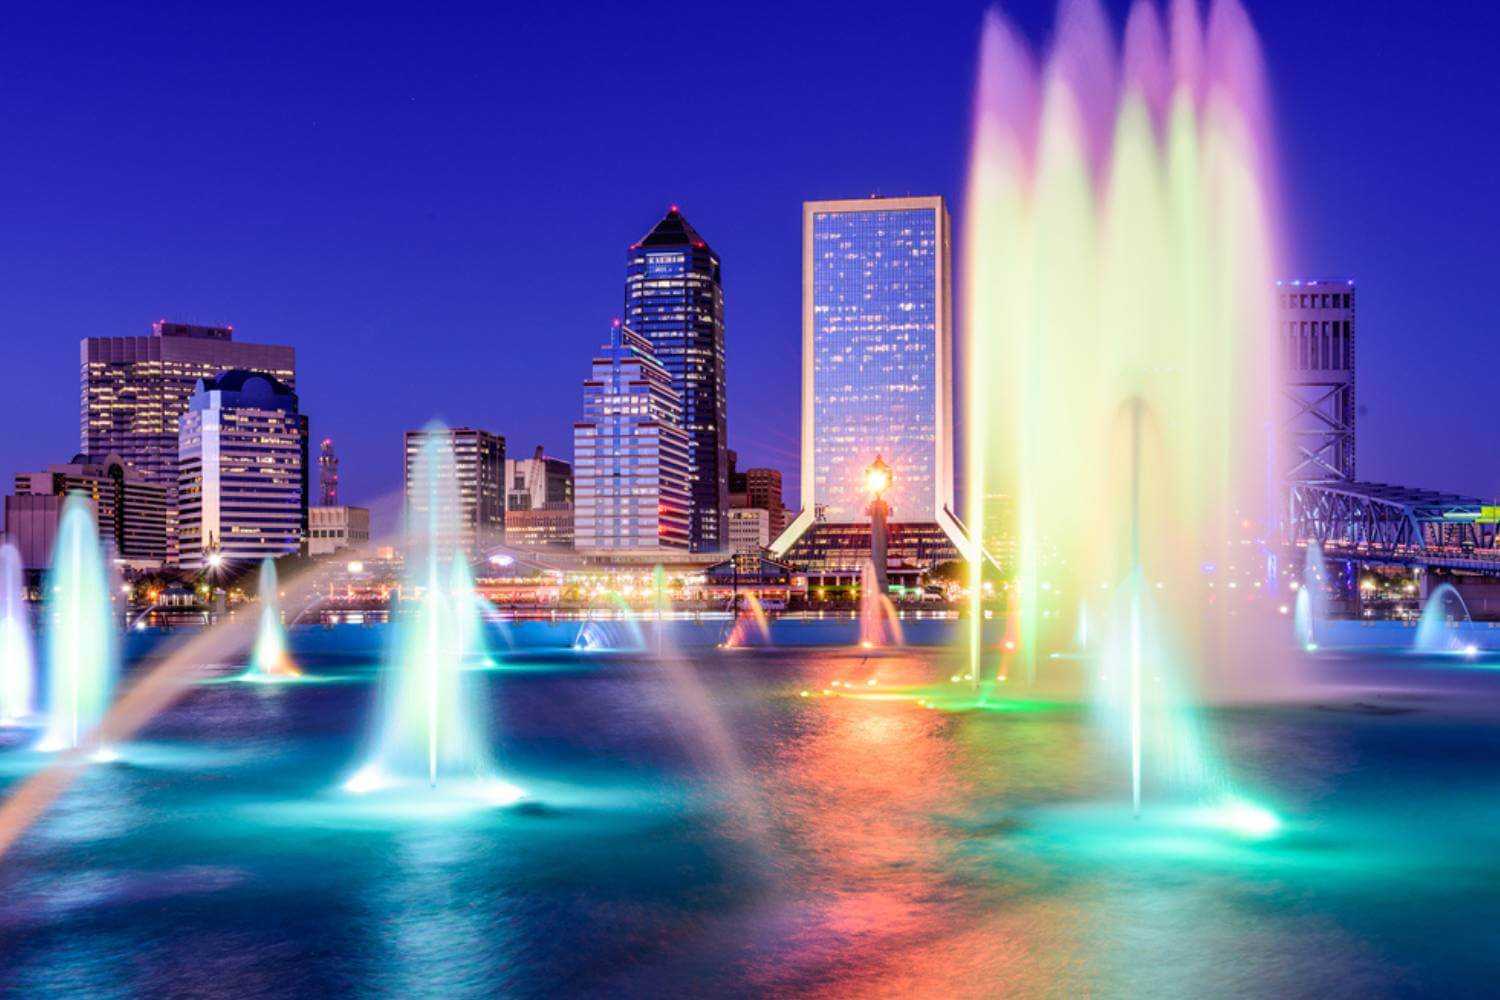 Jacksonville Skyline with Fountains